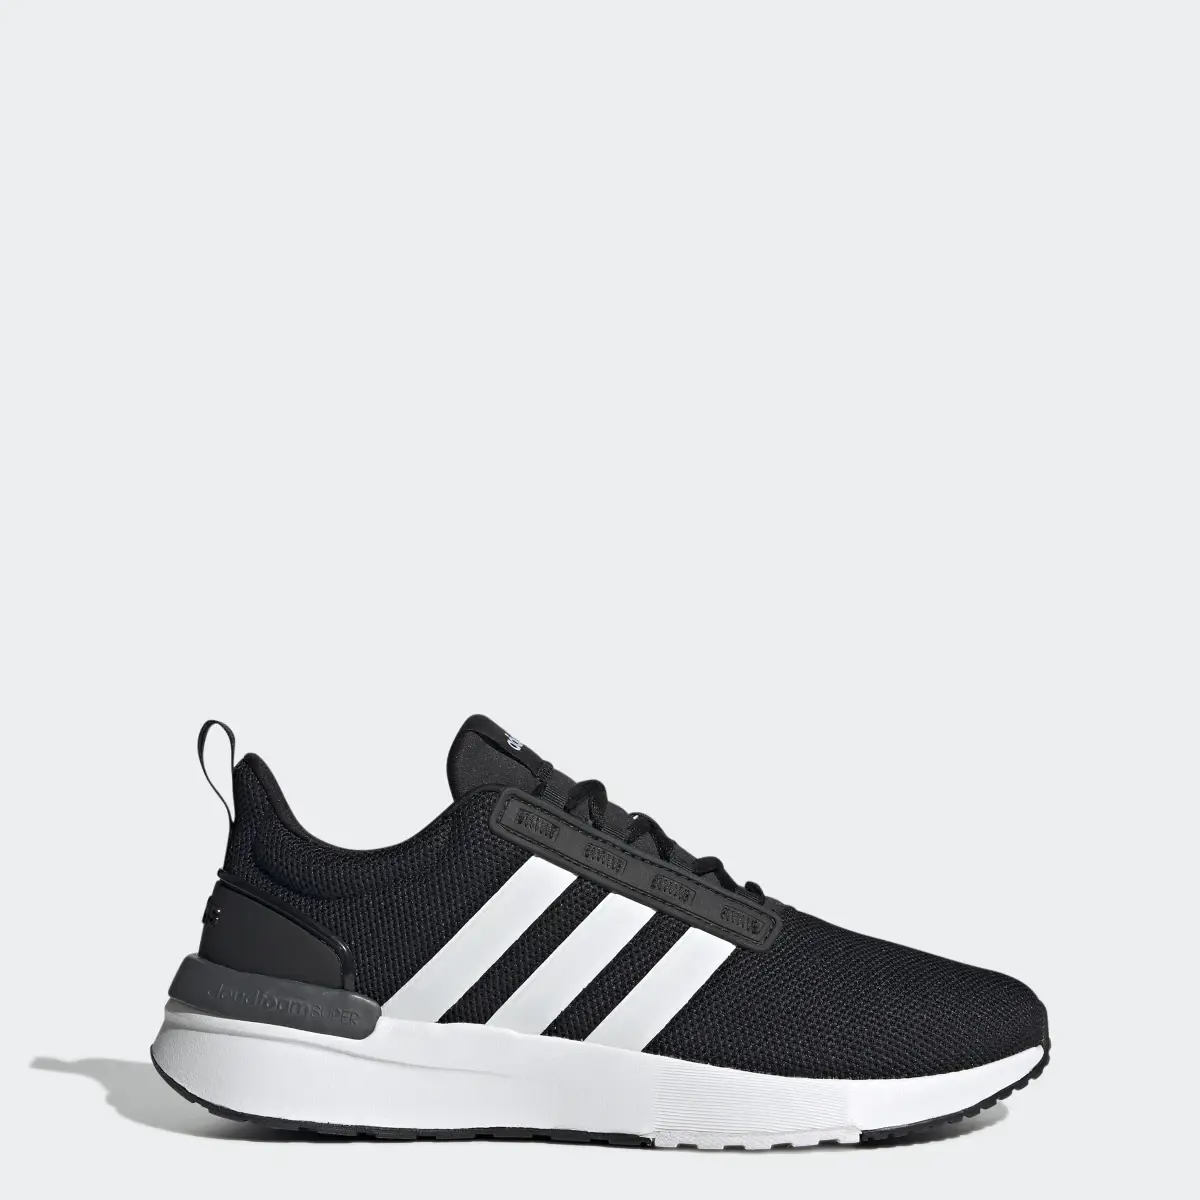 Adidas Racer TR21 Wide Shoes. 1